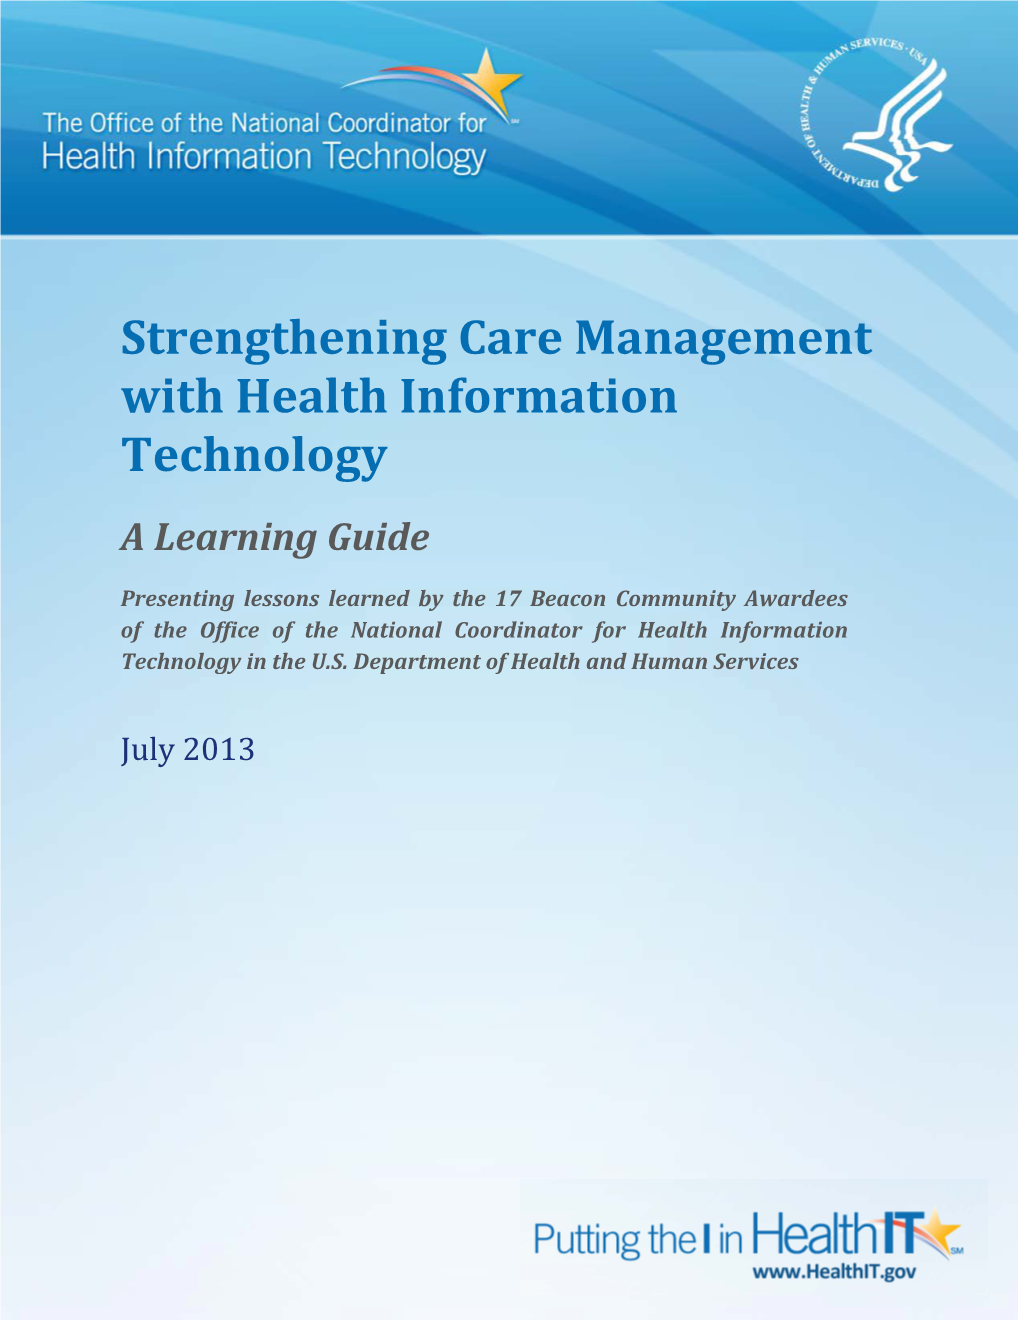 Strengthening Care Management with Health Information Technology a Learning Guide